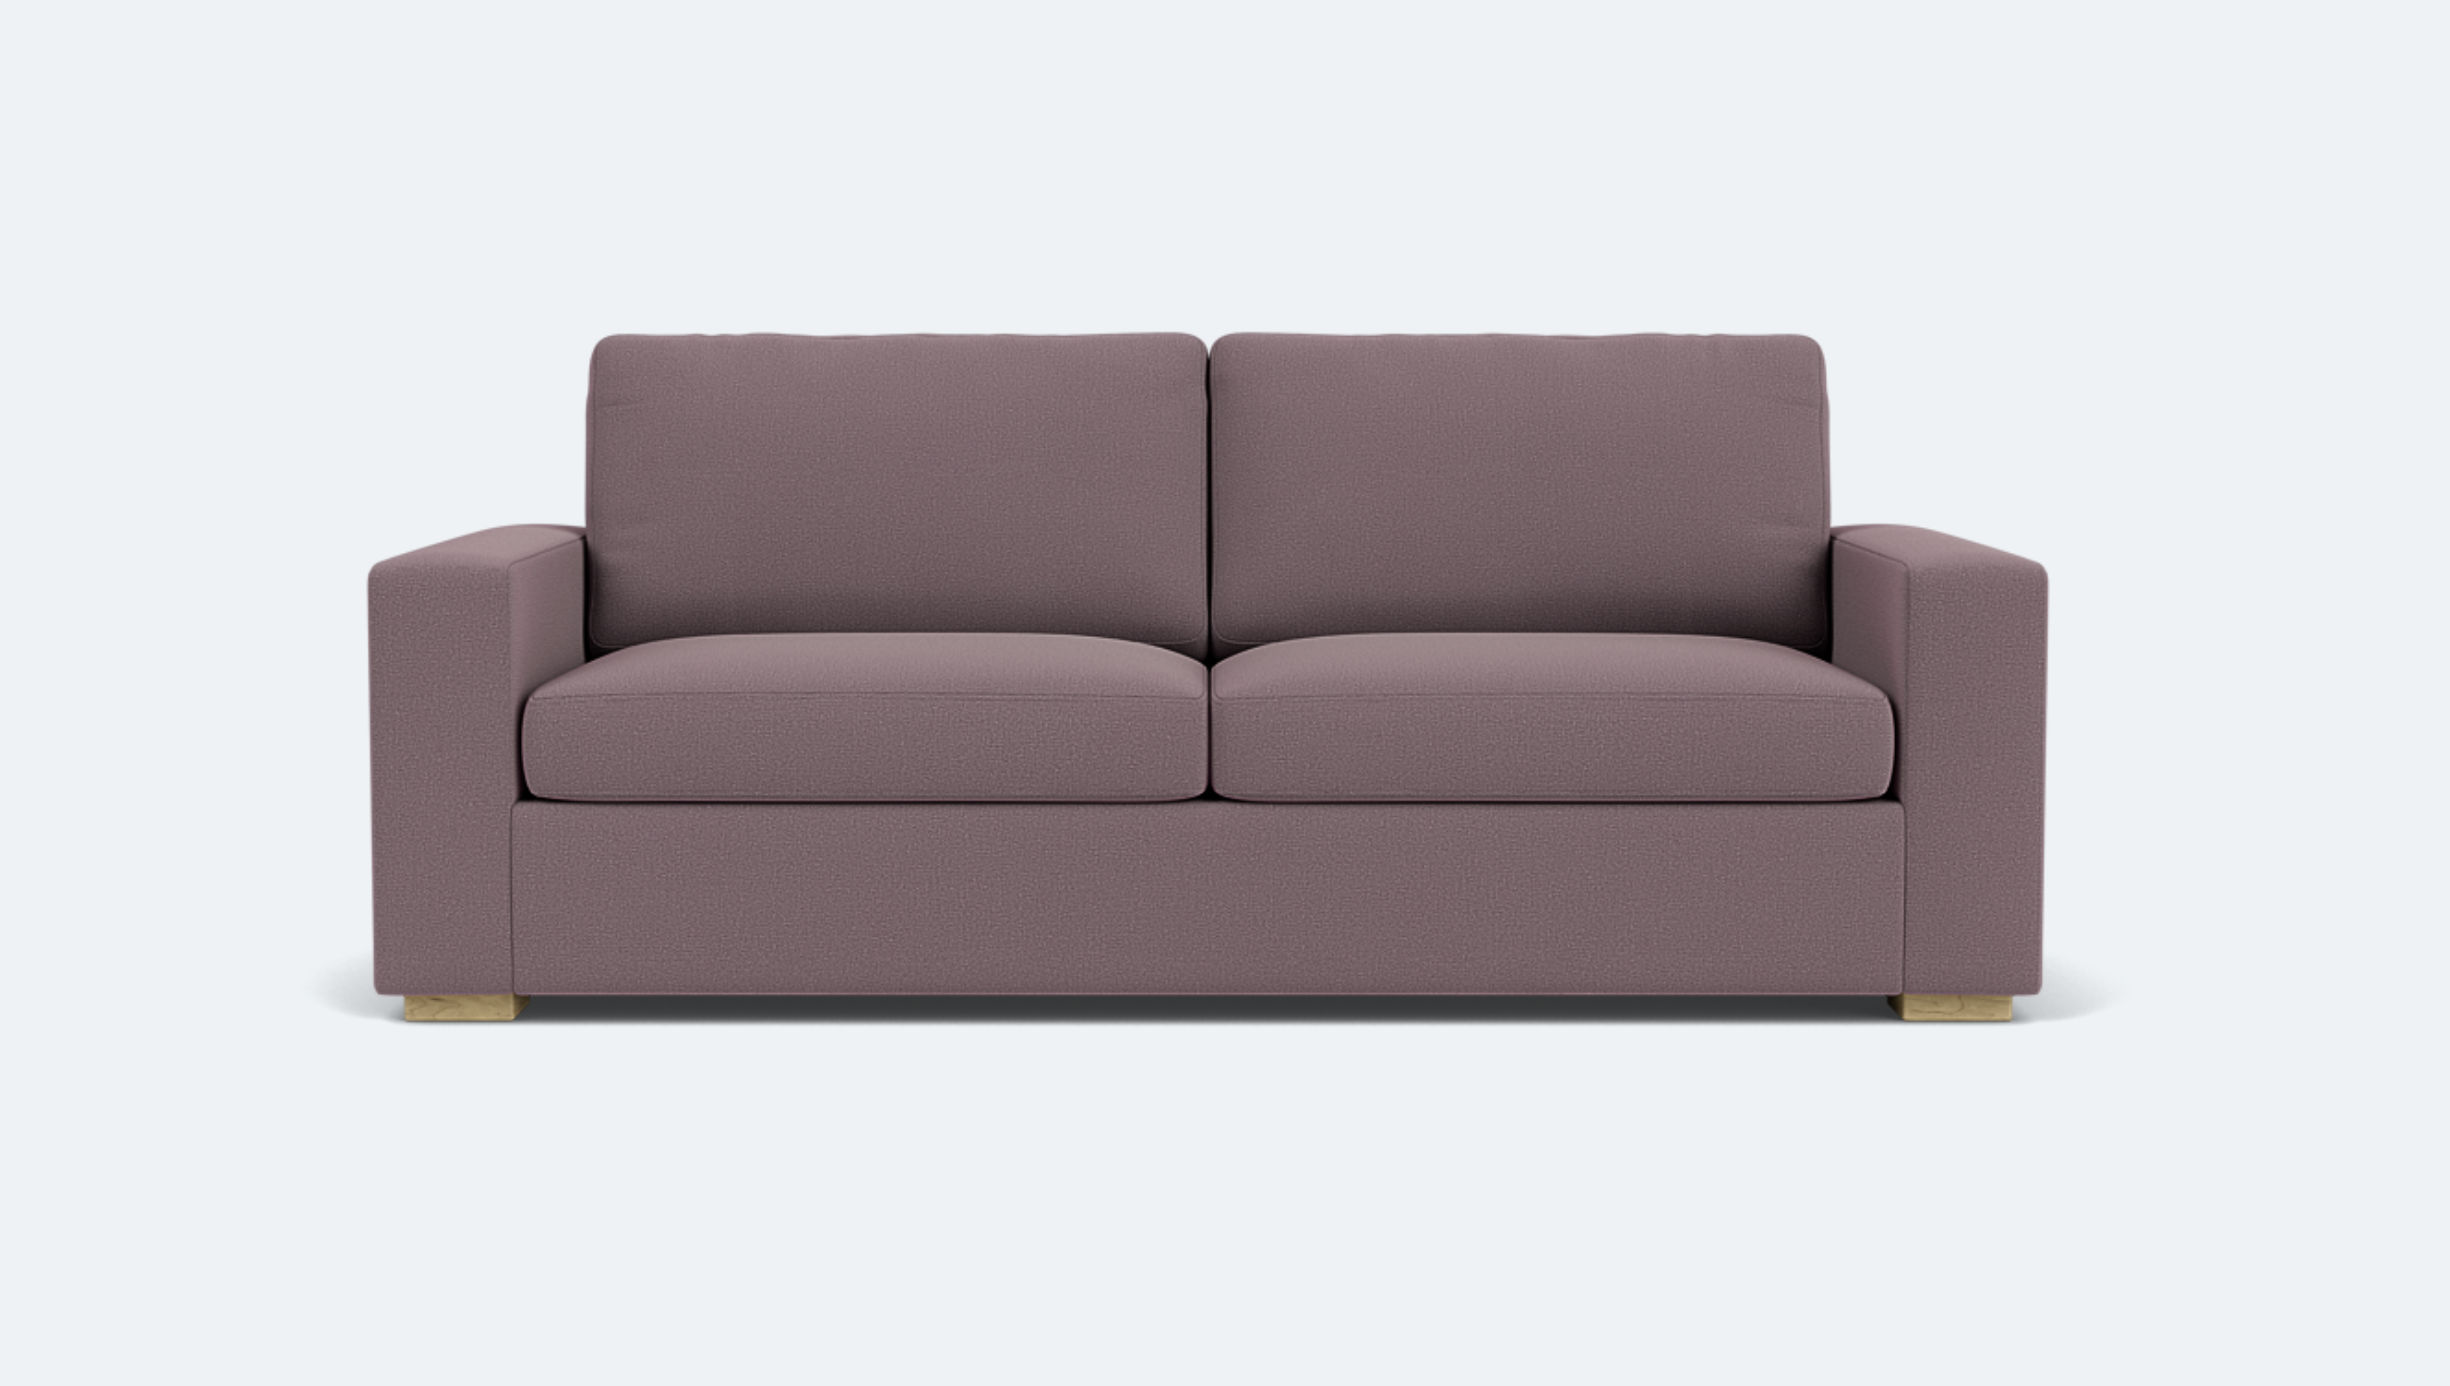 G: Upholstered on a sofa